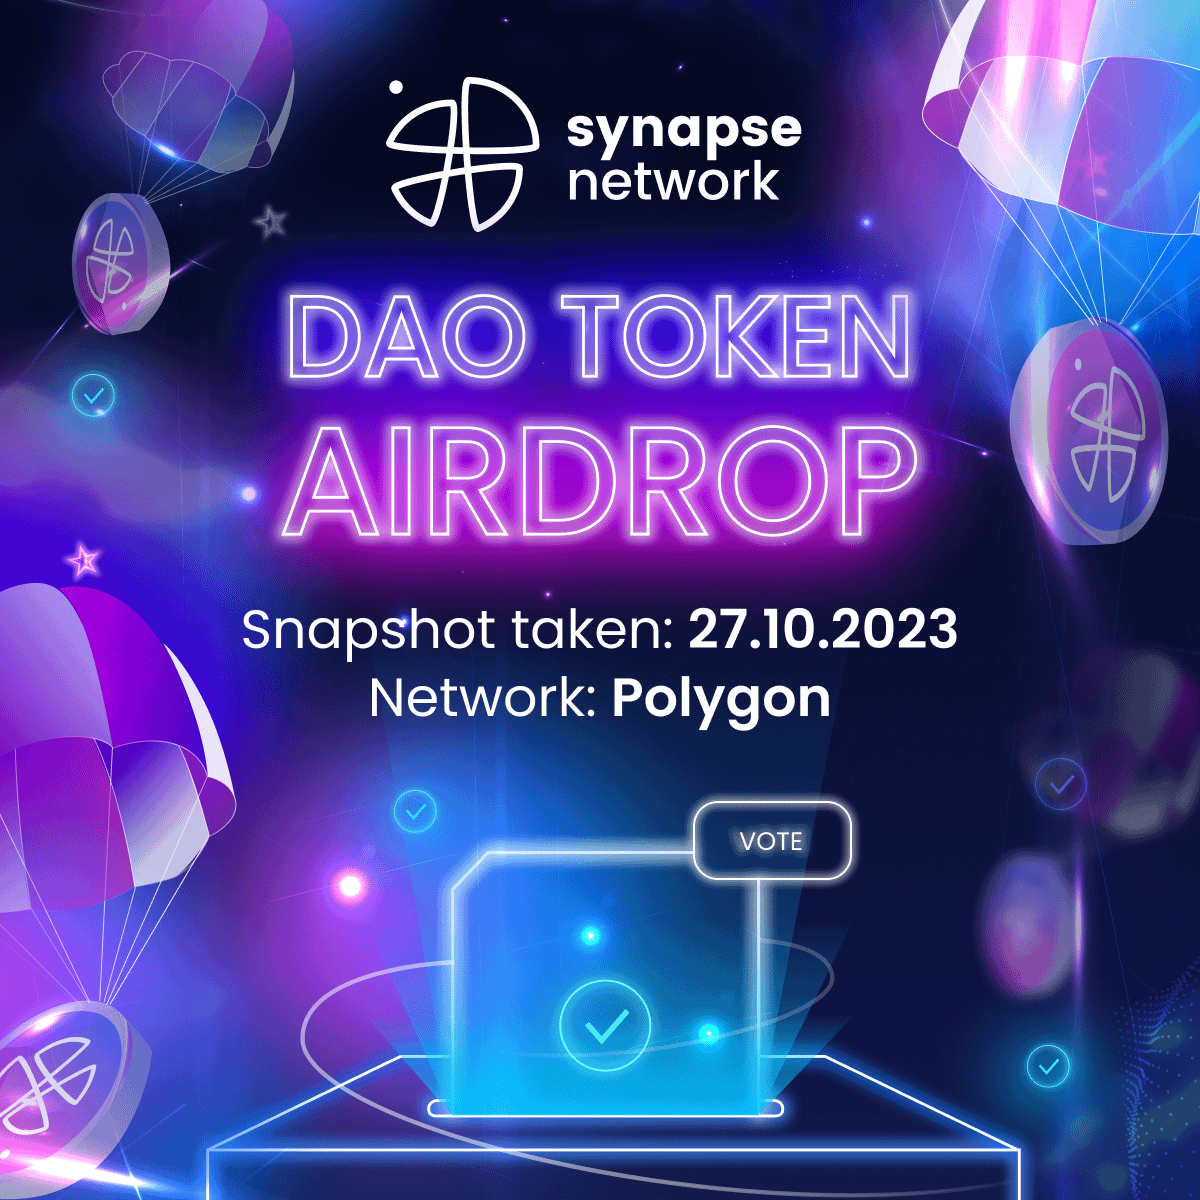 Attention #SynapseWarriors! 📢 DAO Tokens have just been airdropped to your wallets! 🪂 🔗 Network: Polygon 📃 Token address: 0x4807064ac0173402024f7f8d19dee710d360aff6